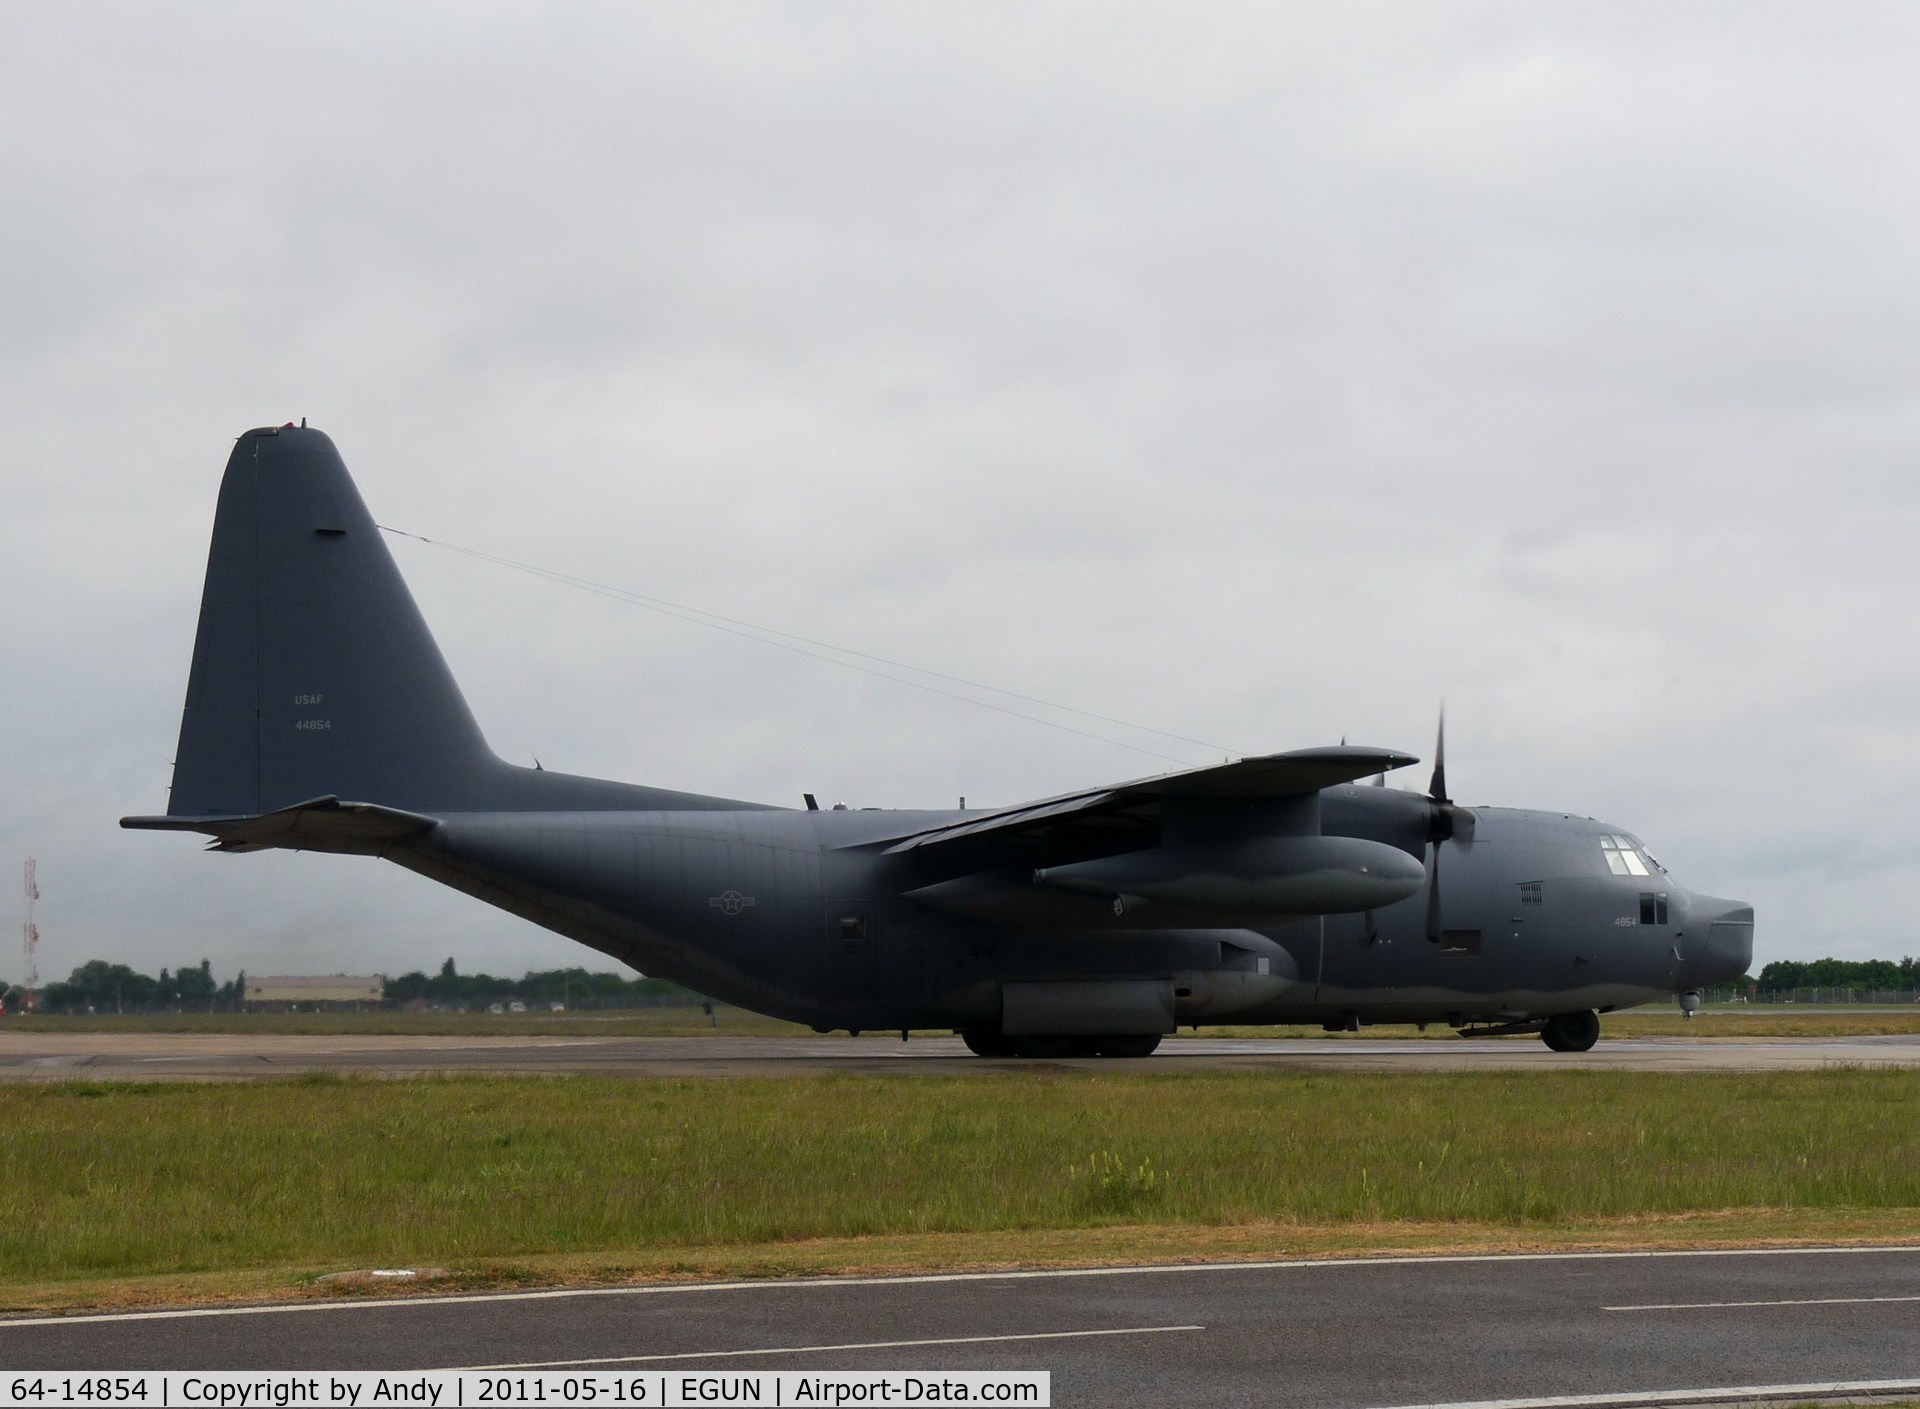 64-14854, 1964 Lockheed MC-130P Combat Shadow C/N 382-4038, Taxing at Mildenhall for departure